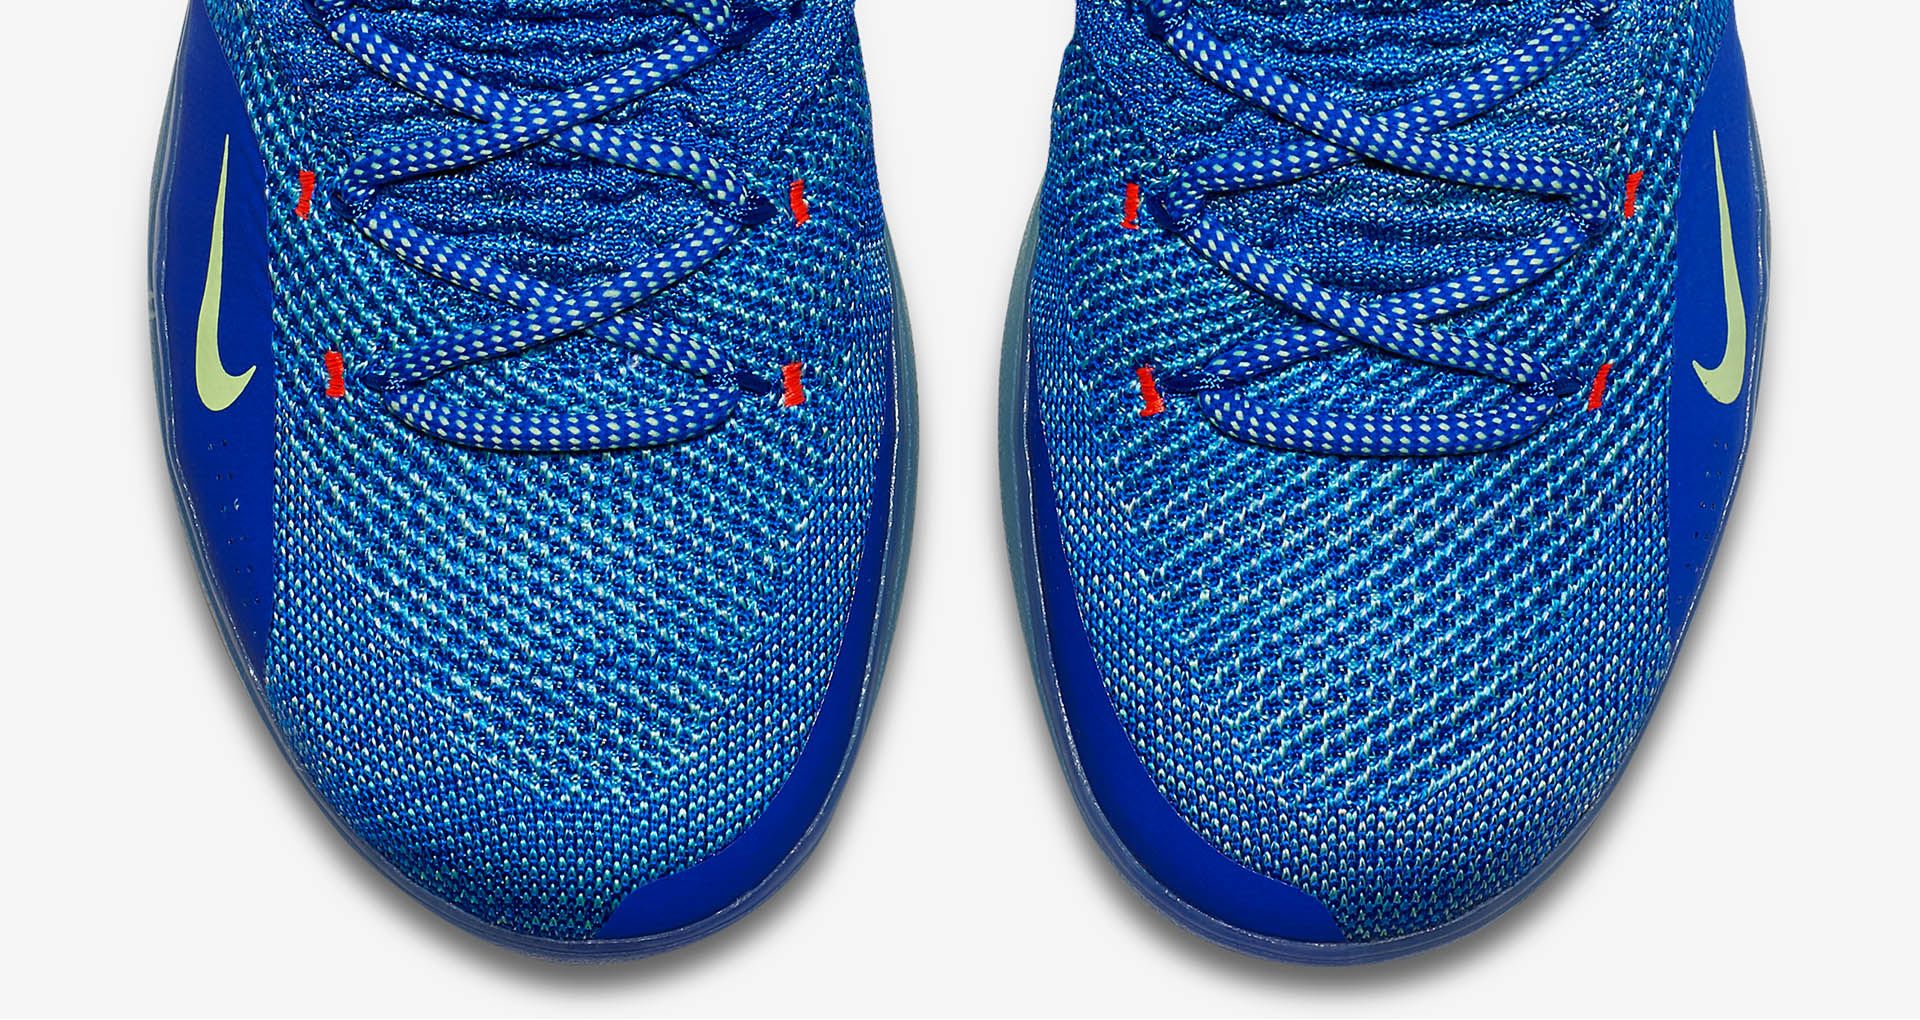 Nike KD11 'Paranoid' Release Date. Nike SNKRS